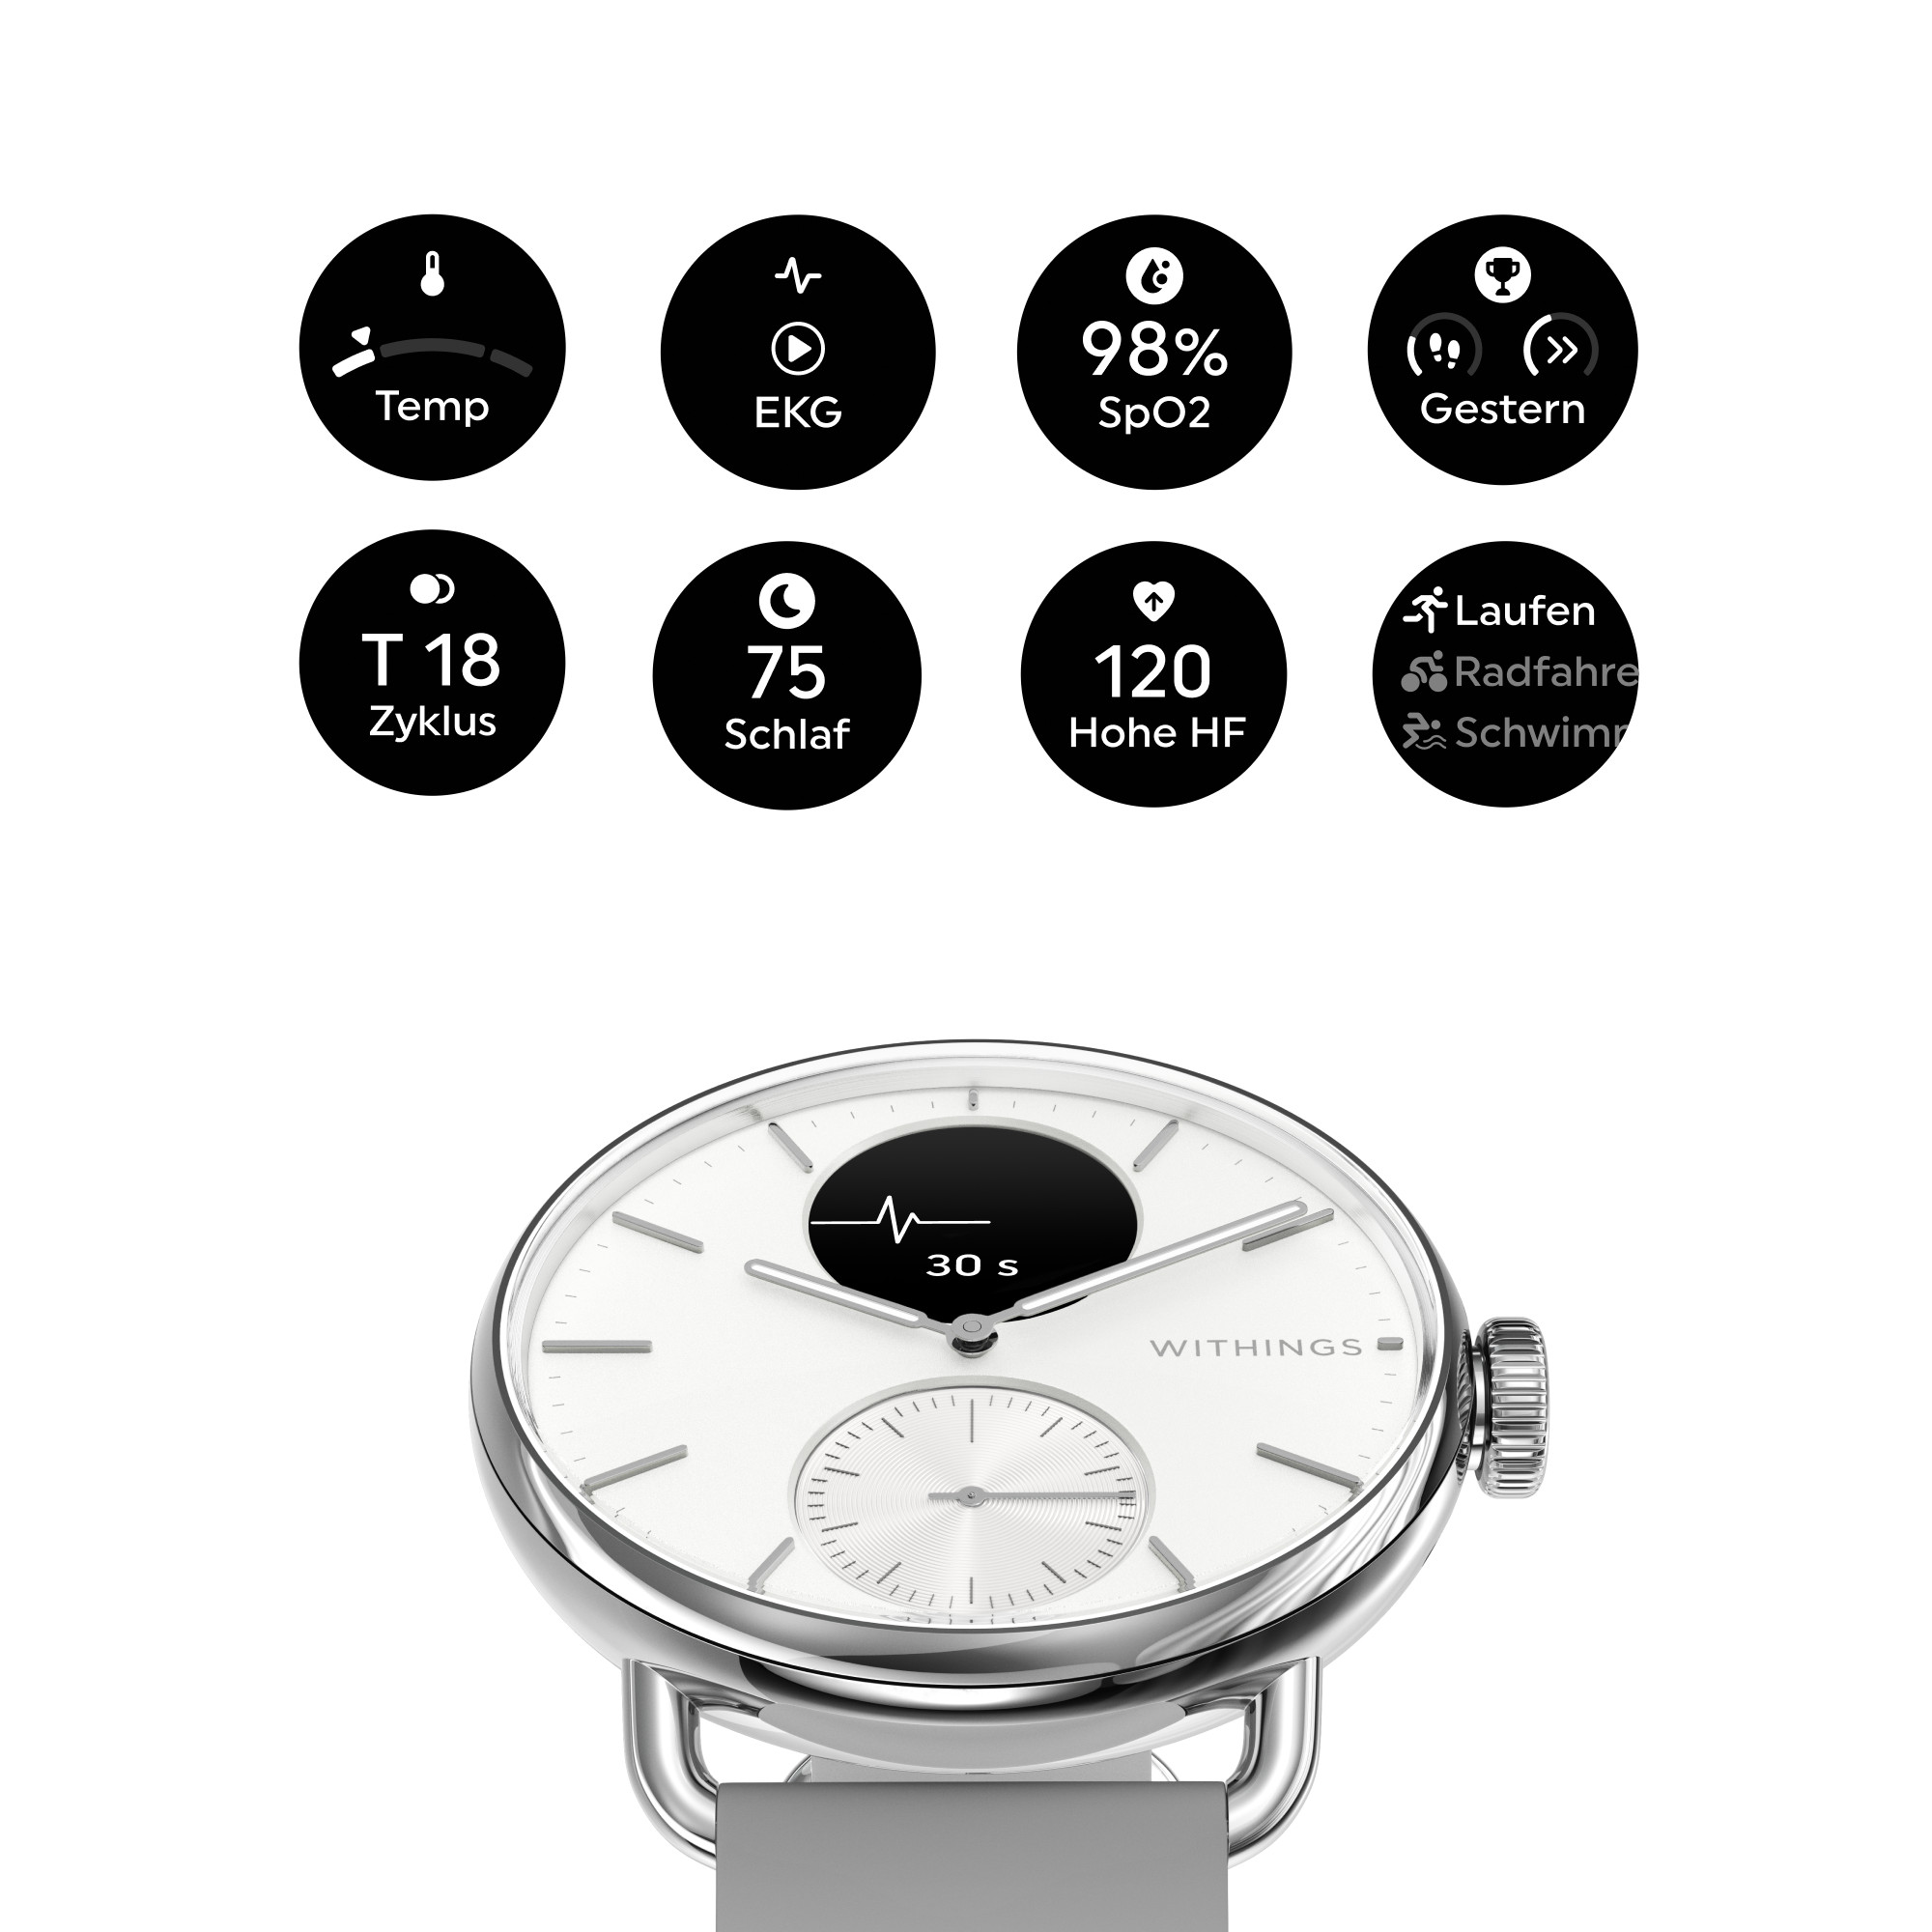 WITHINGS Scanwatch 2 Pearl White 38mm HWA10-MODEL2-ALL-IN